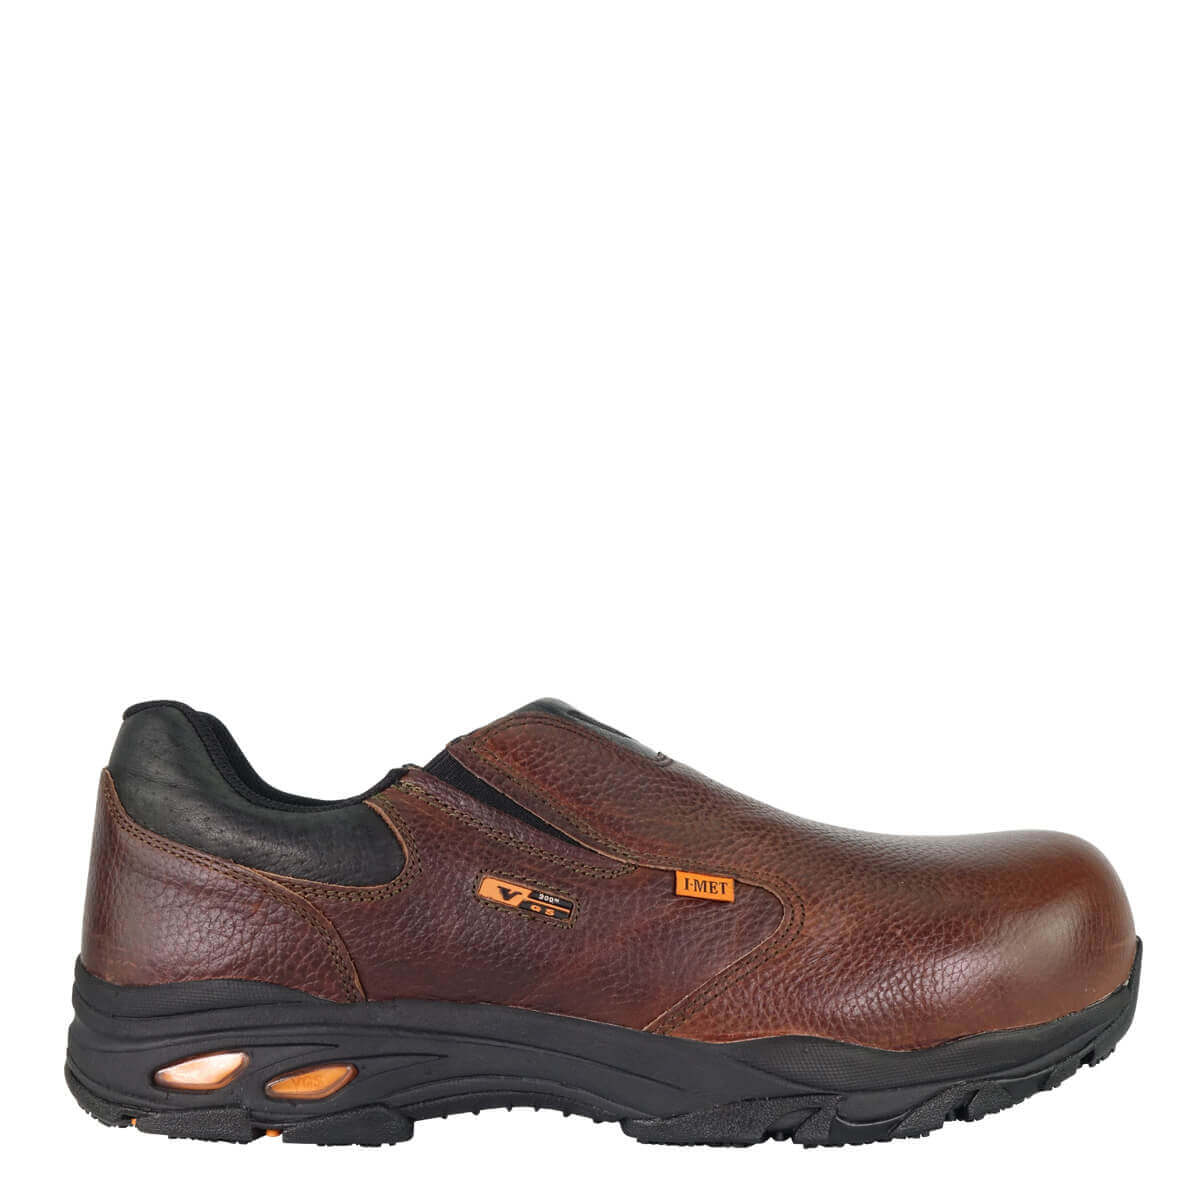 THOROGOOD I-MET²™ SERIES COMPOSITE TOE WORK OXFORD SHOES 804-4320 ALL SIZES 